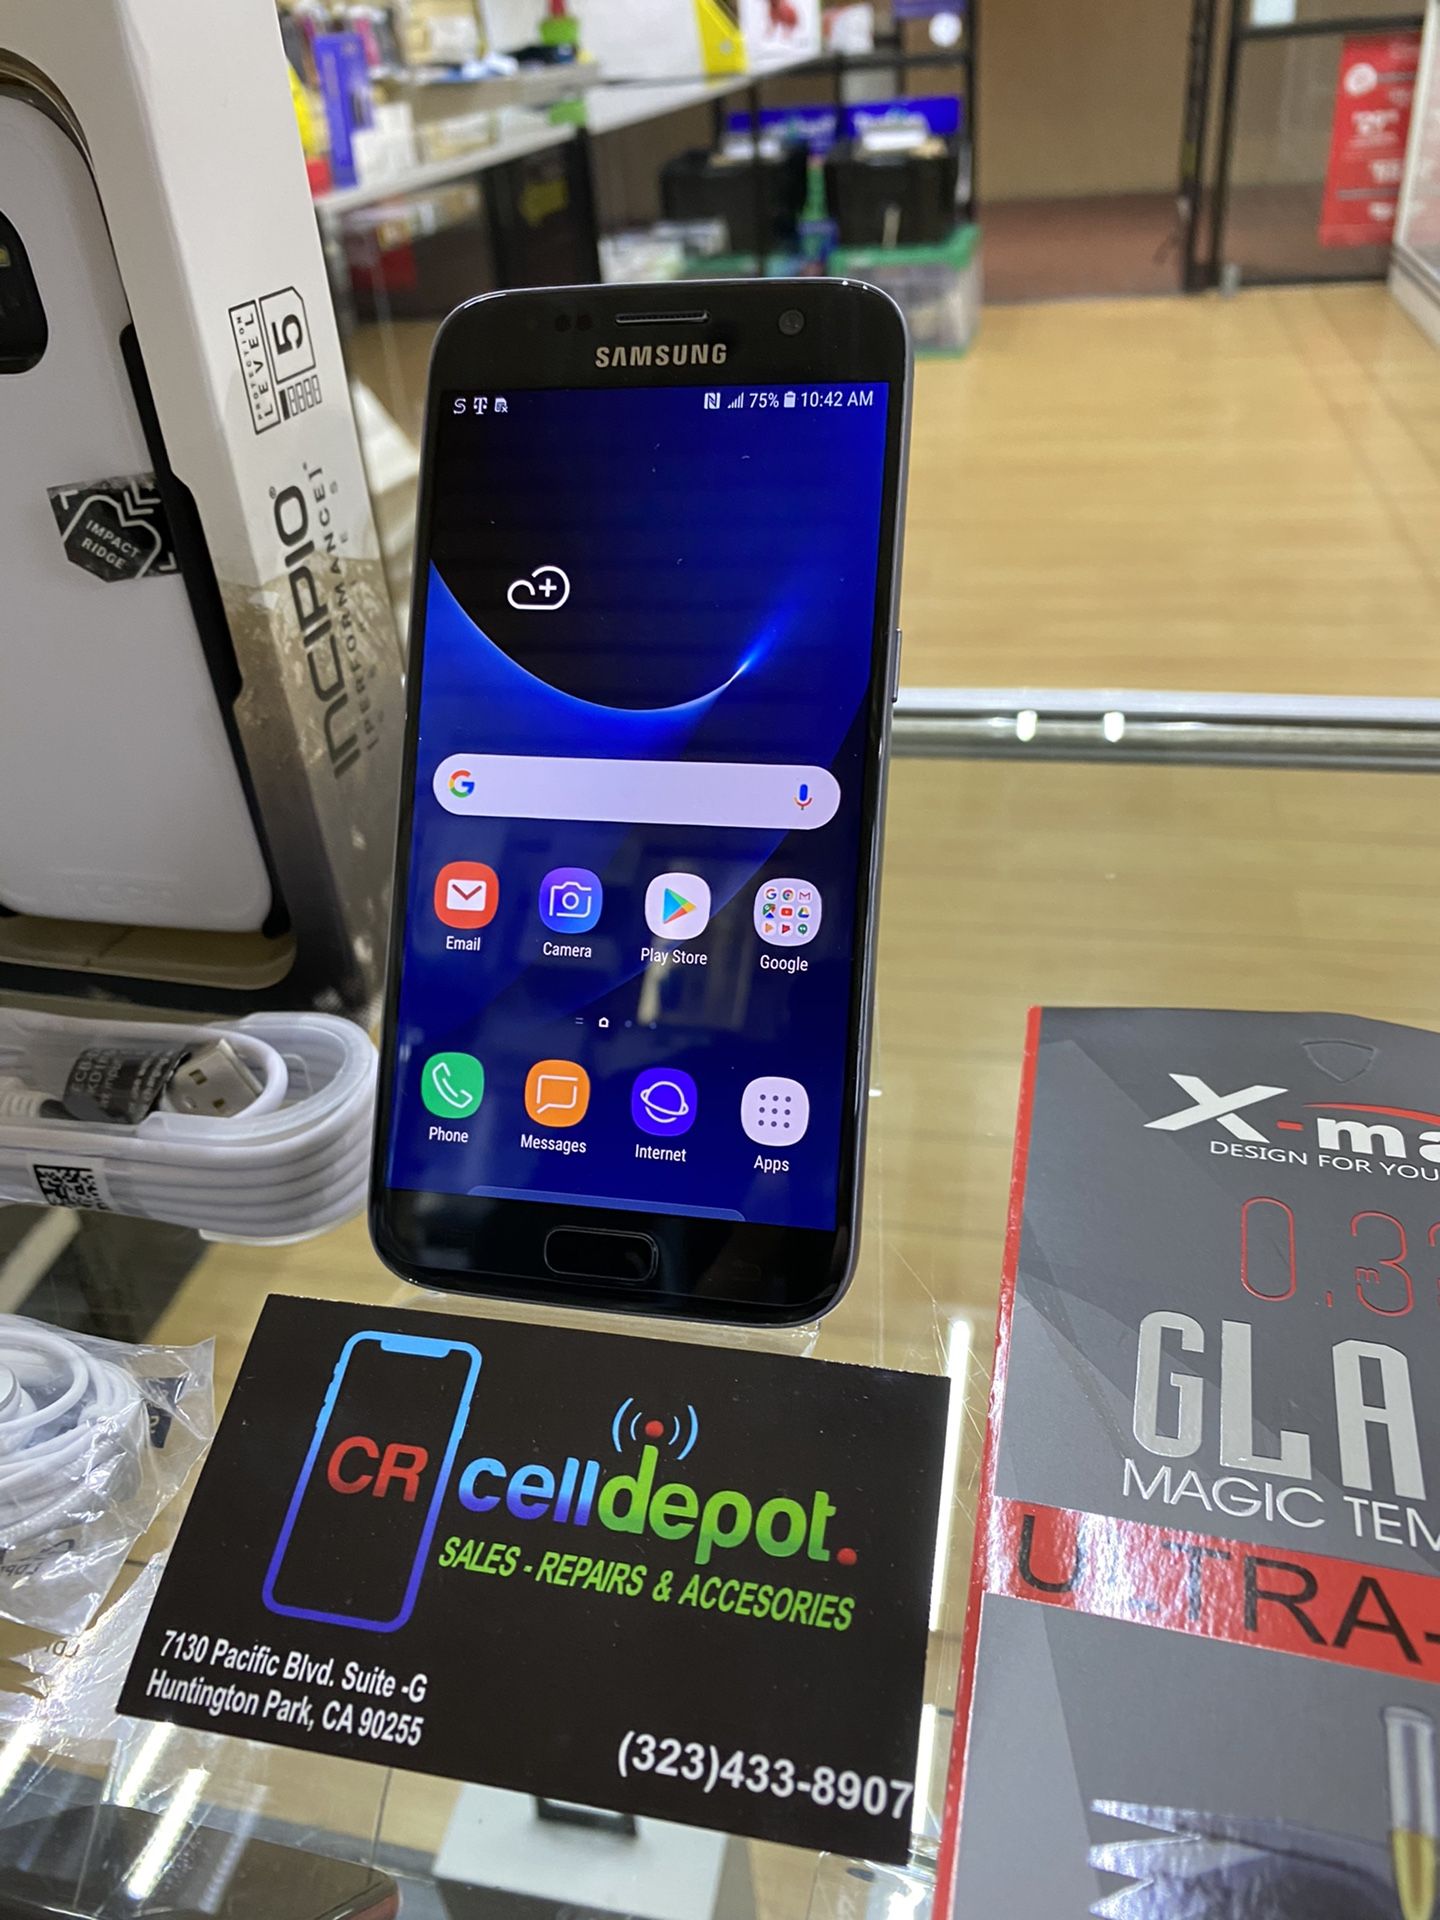 Samsung Galaxy s7 New Condition Factory Unlocked 32gb all accessories included!😱🎉🤗